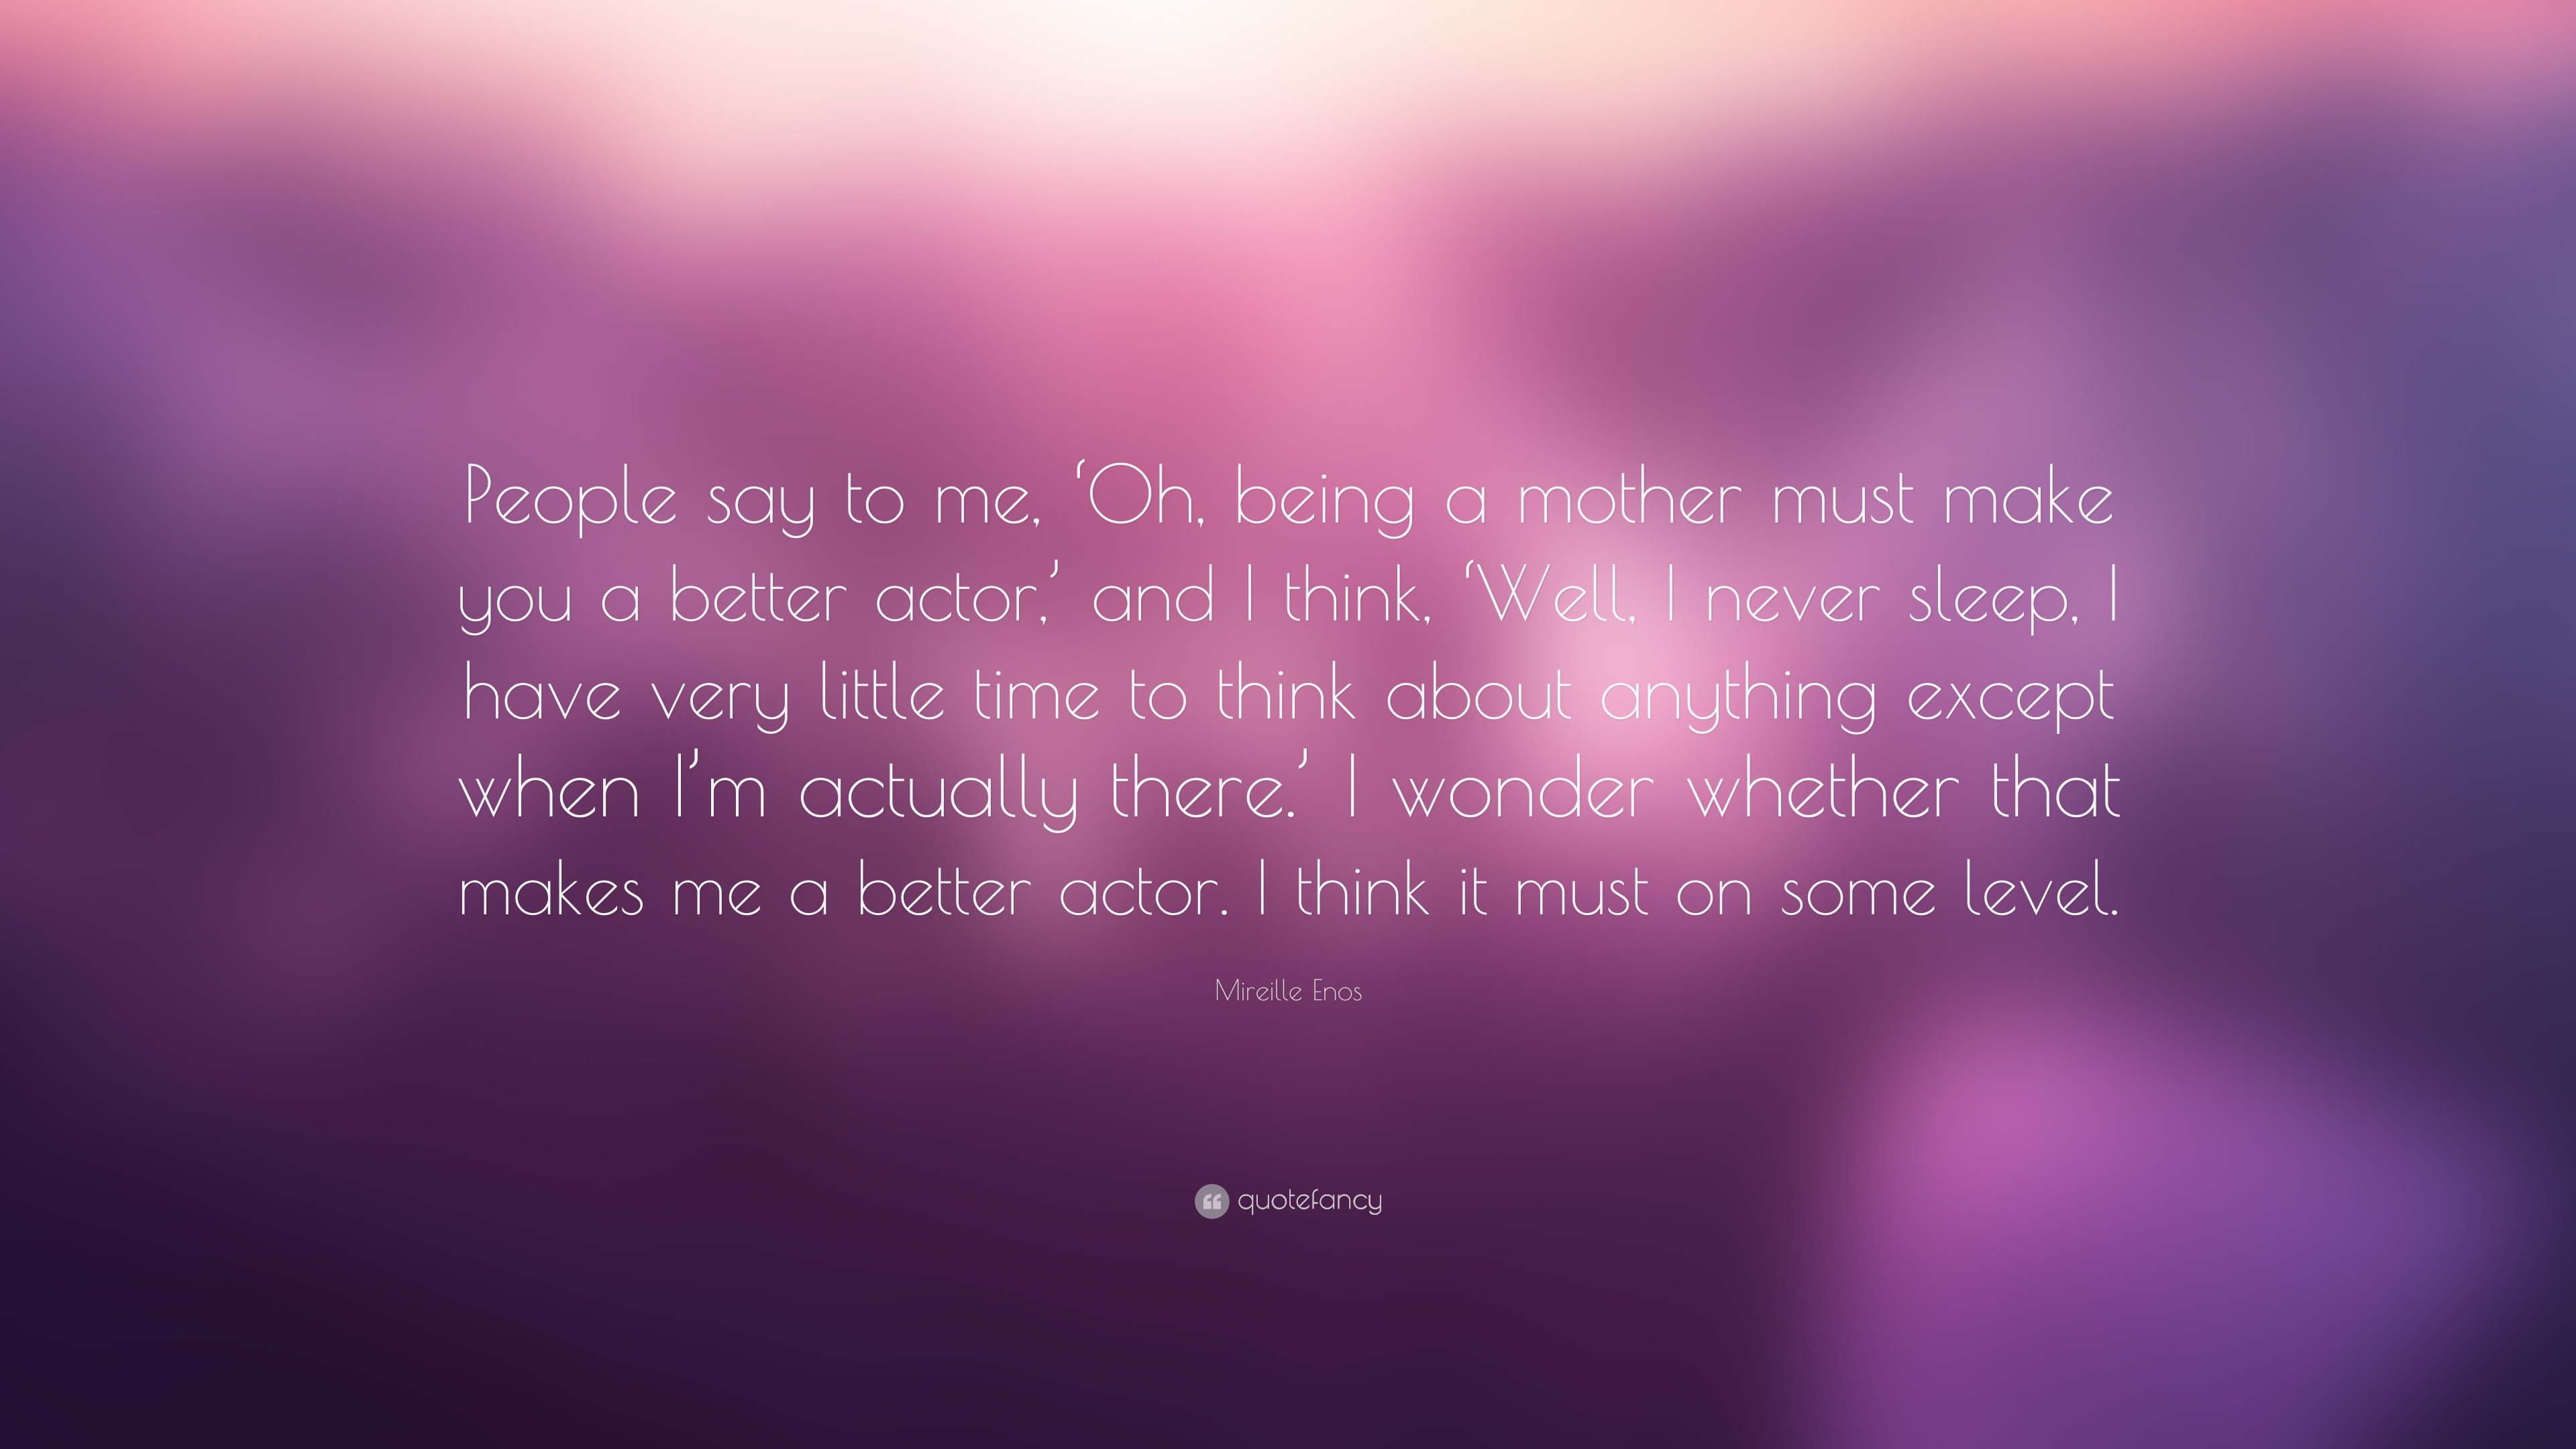 Mireille Enos Quote: “People say to me, ‘Oh, being a mother must make ...